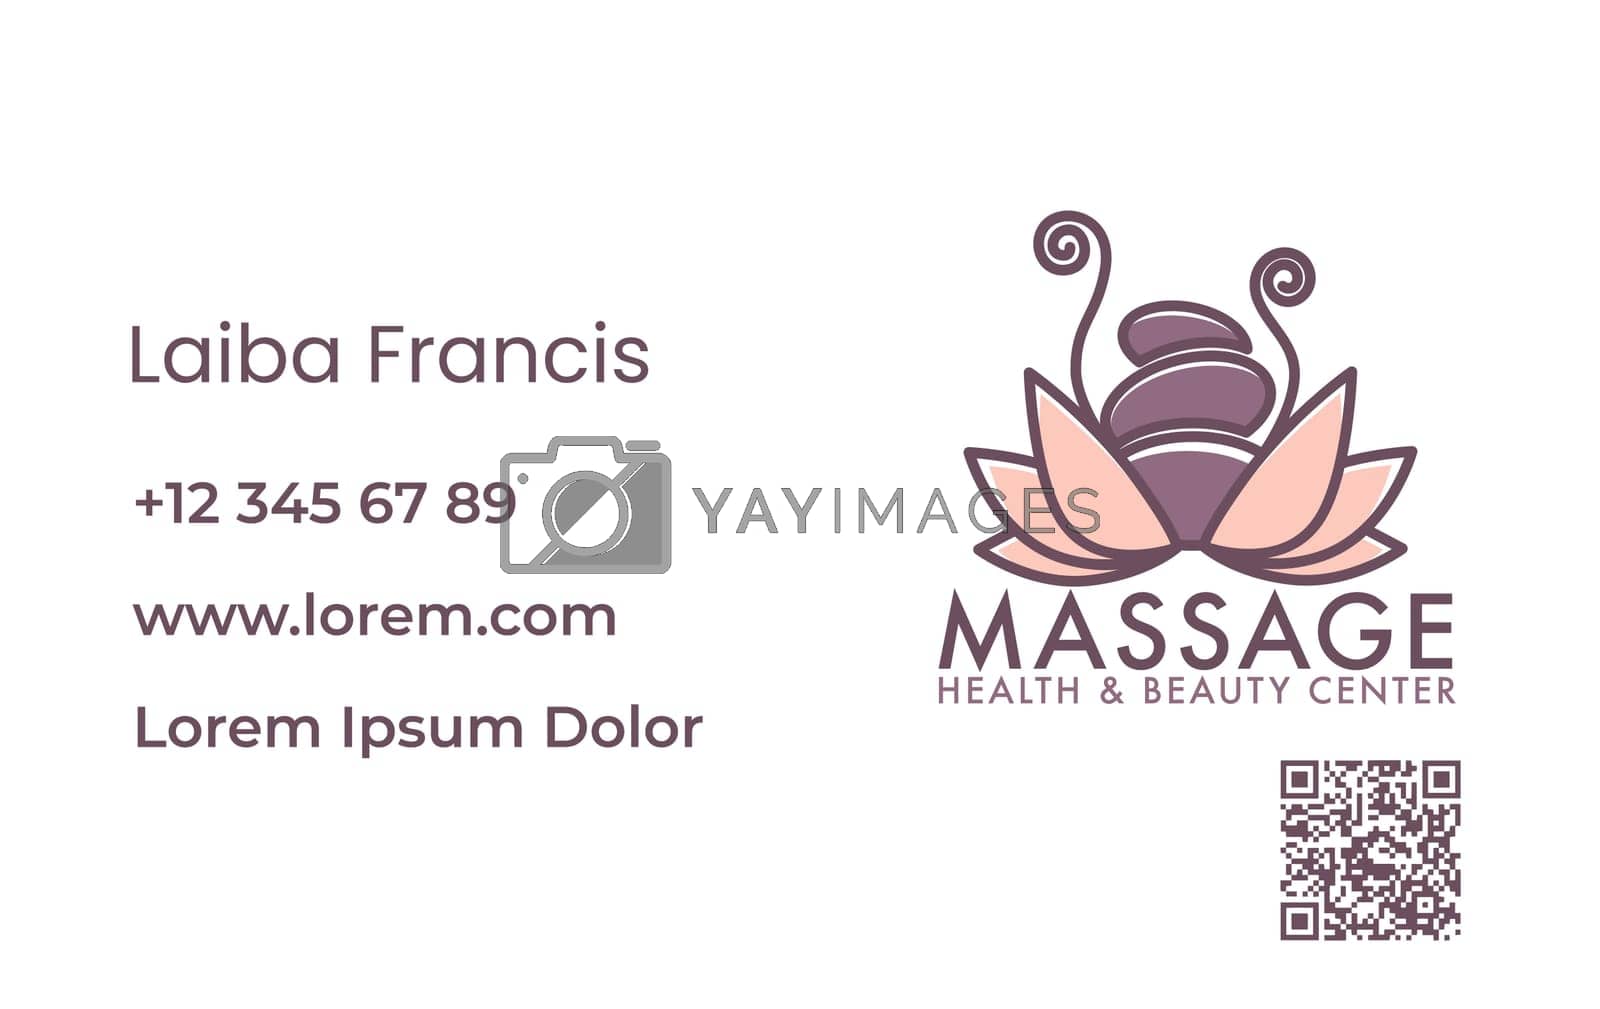 Royalty free image of Massage and beauty services, business card logo by Sonulkaster